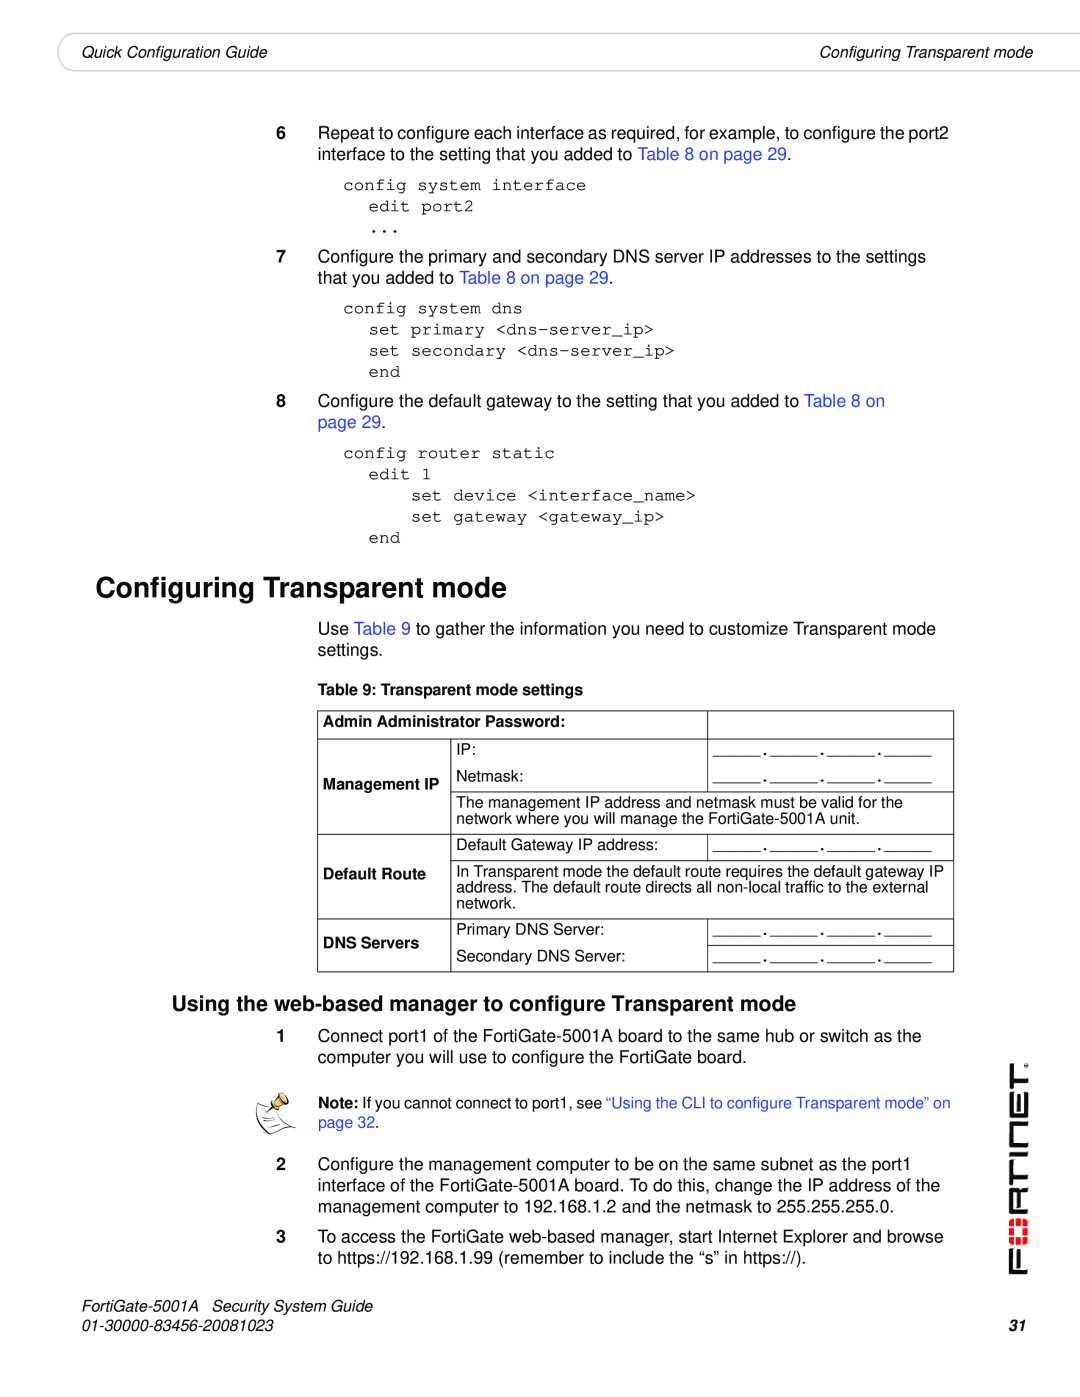 Fortinet 5001A-SW, 5001A-DW manual Configuring Transparent mode, Using the web-based manager to configure Transparent mode 